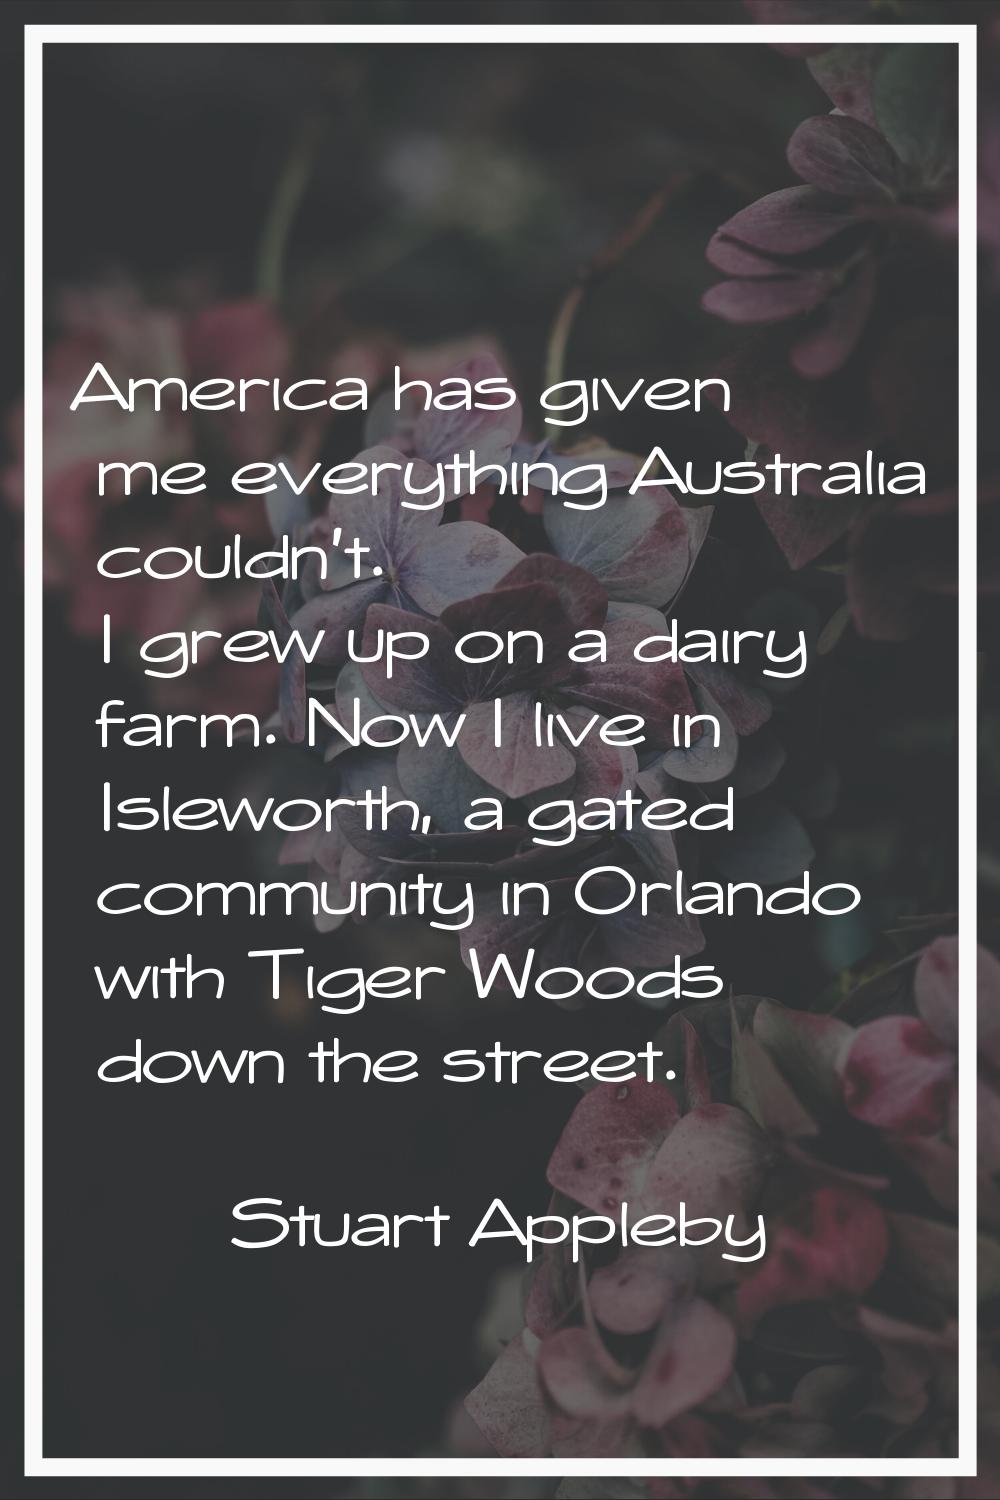 America has given me everything Australia couldn't. I grew up on a dairy farm. Now I live in Islewo